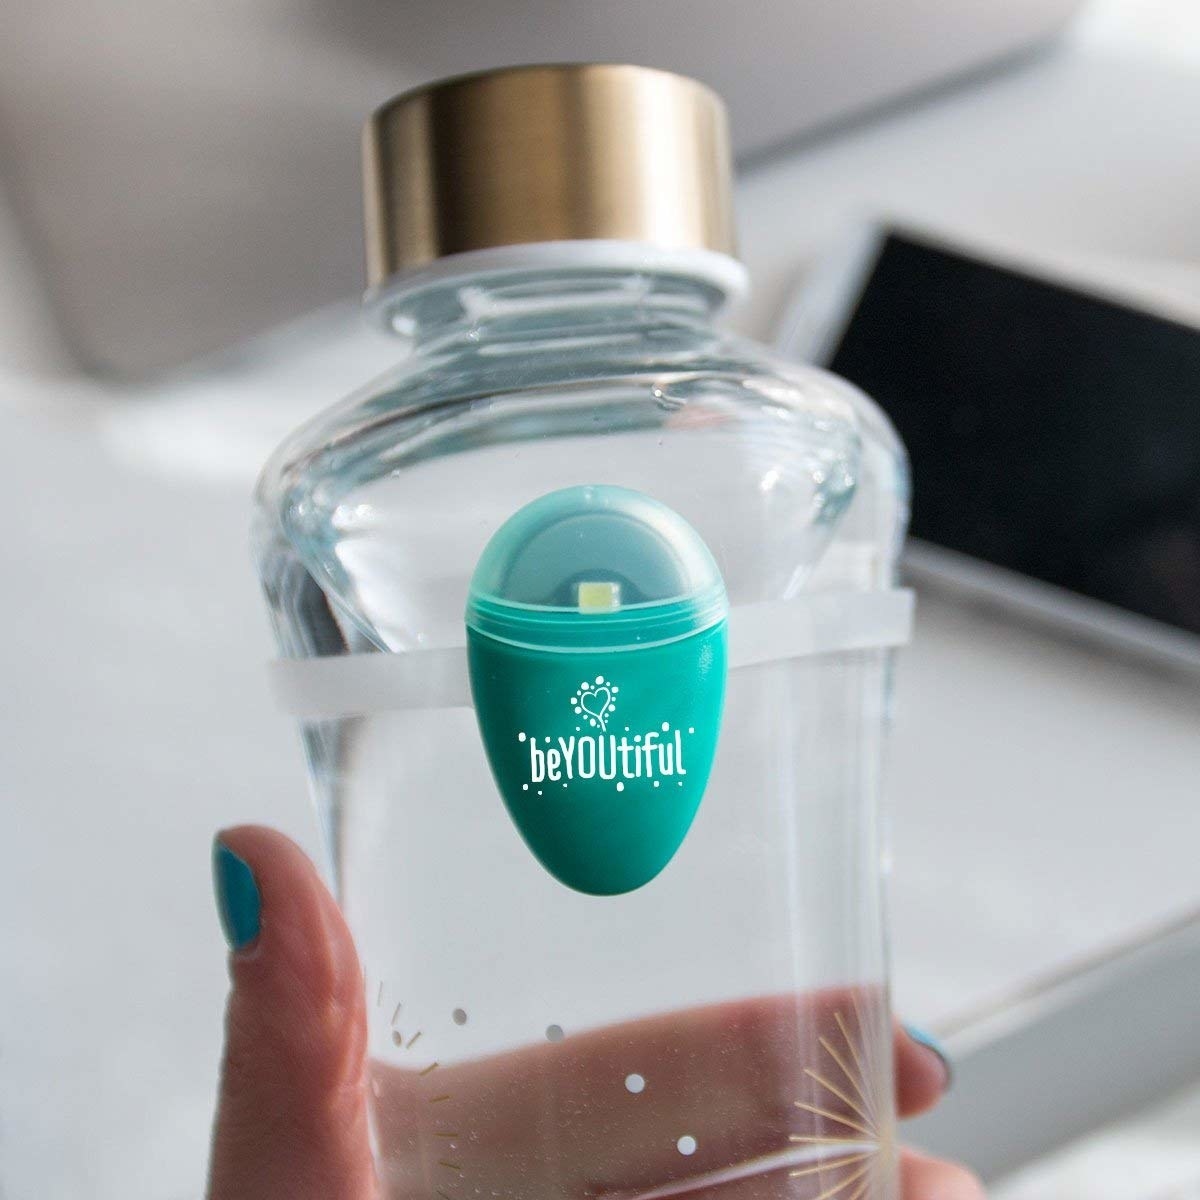 the device which has a light and the word &quot;beautiful&quot; written on it. it&#x27;s held to the bottle by a silicone ring (similar to a rubber band).